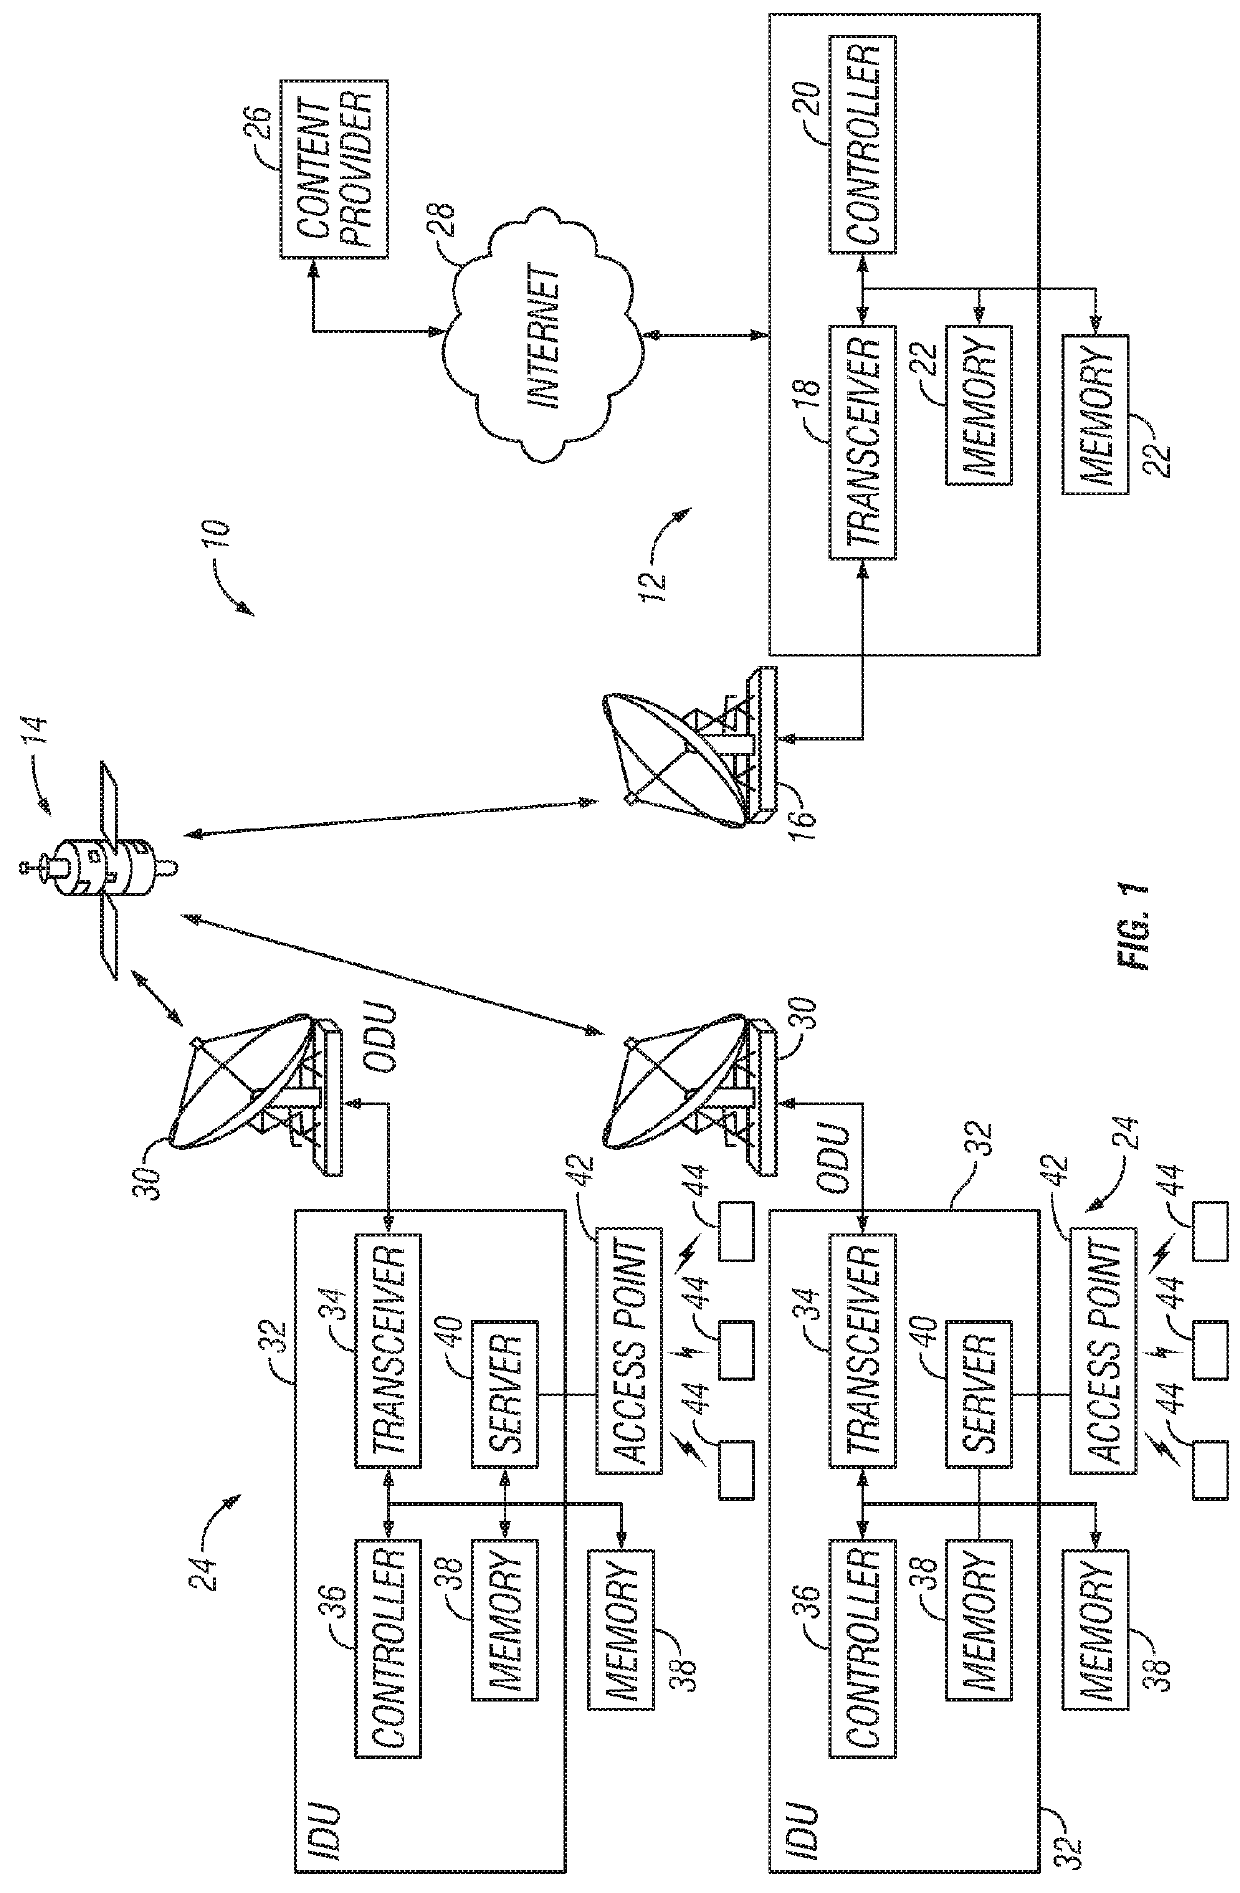 Satellite communication network terminal installation method and system